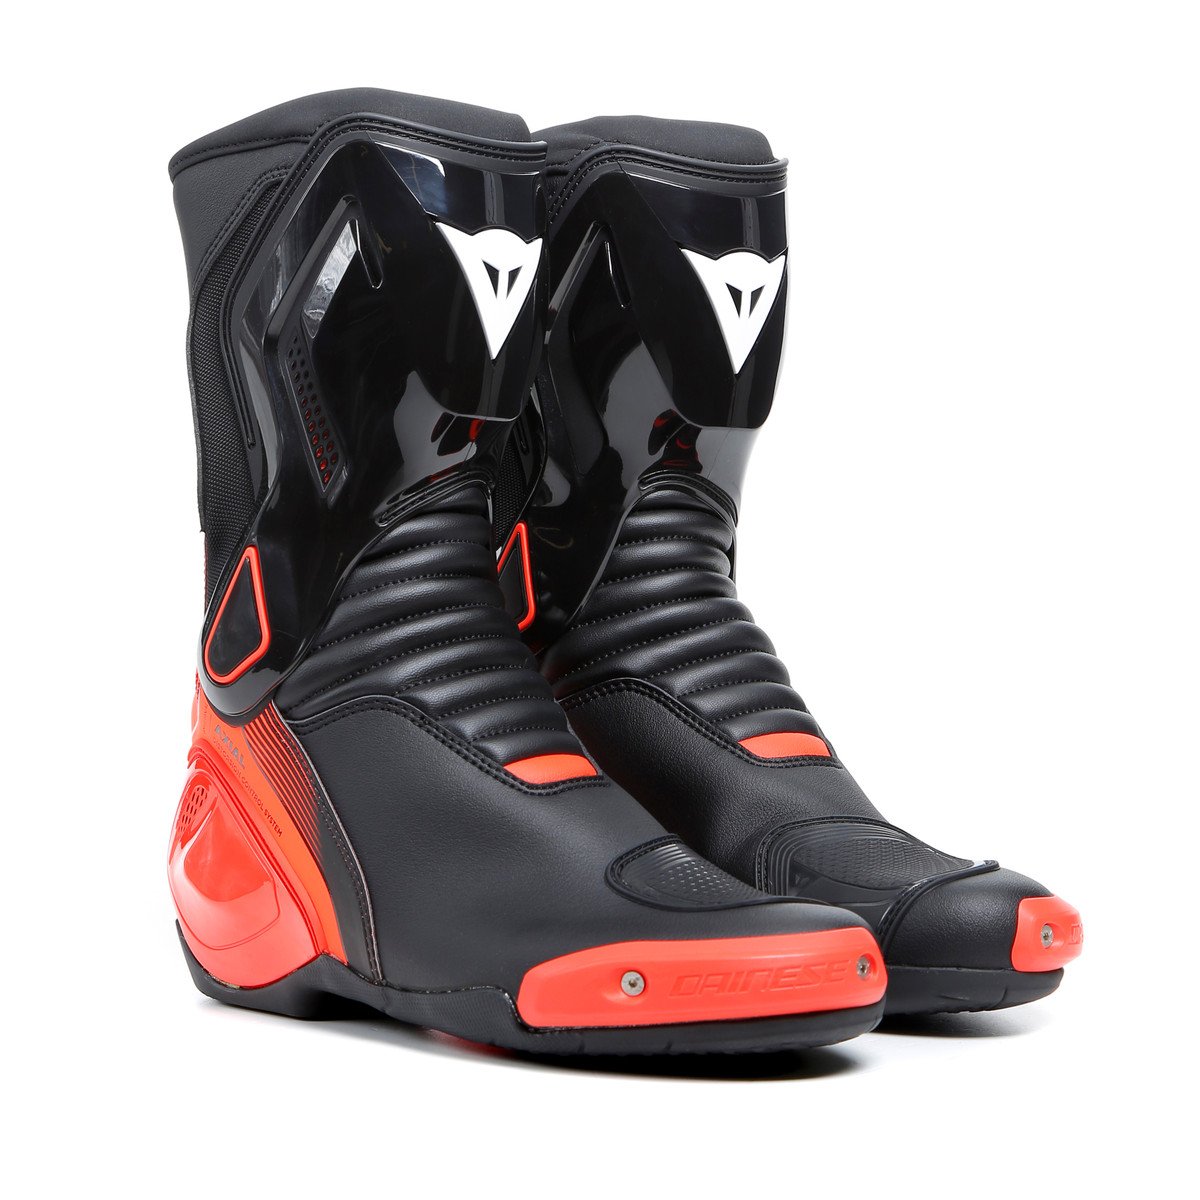 Image of Dainese Nexus 2 Boots Black Fluo Red Size 46 ID 8051019292537